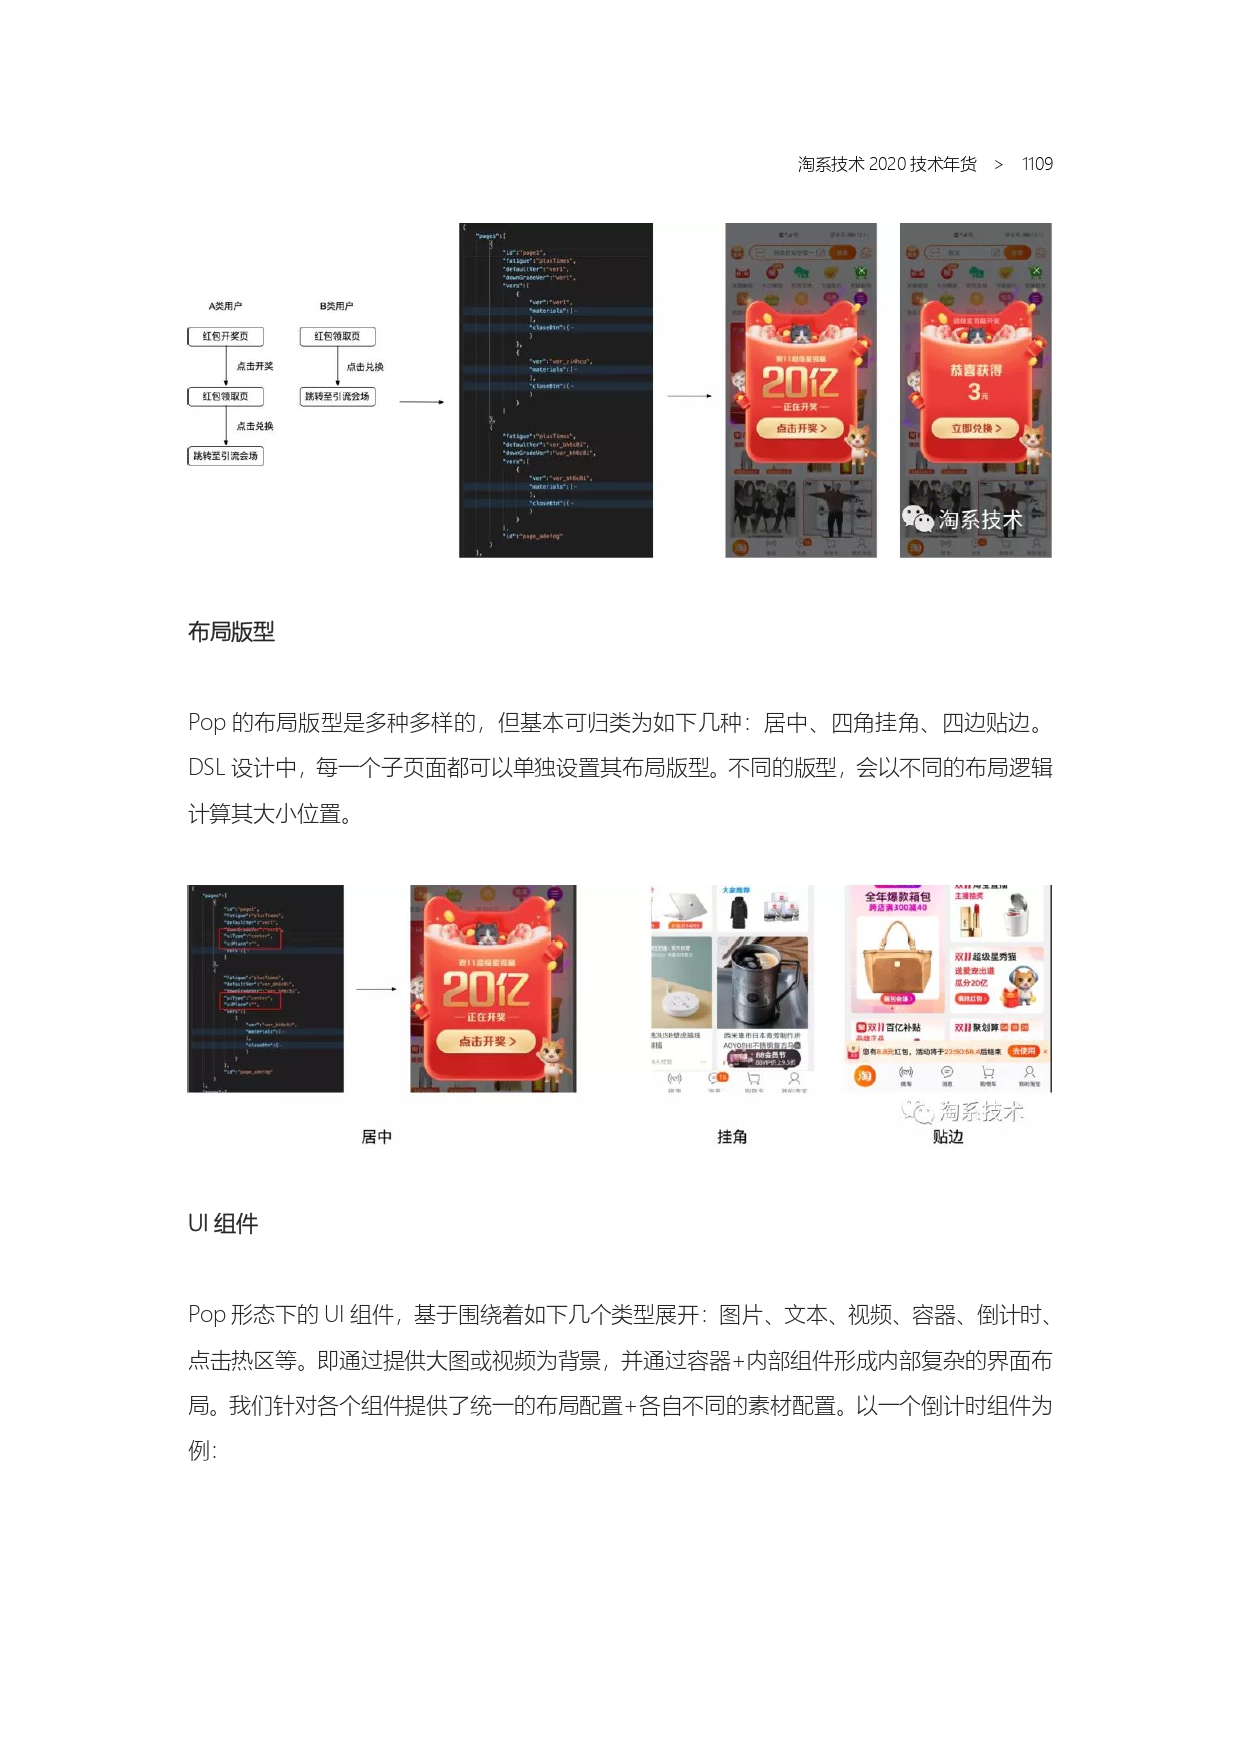 The Complete Works of Tao Technology 2020-571-1189-301-619_page-0239.jpg